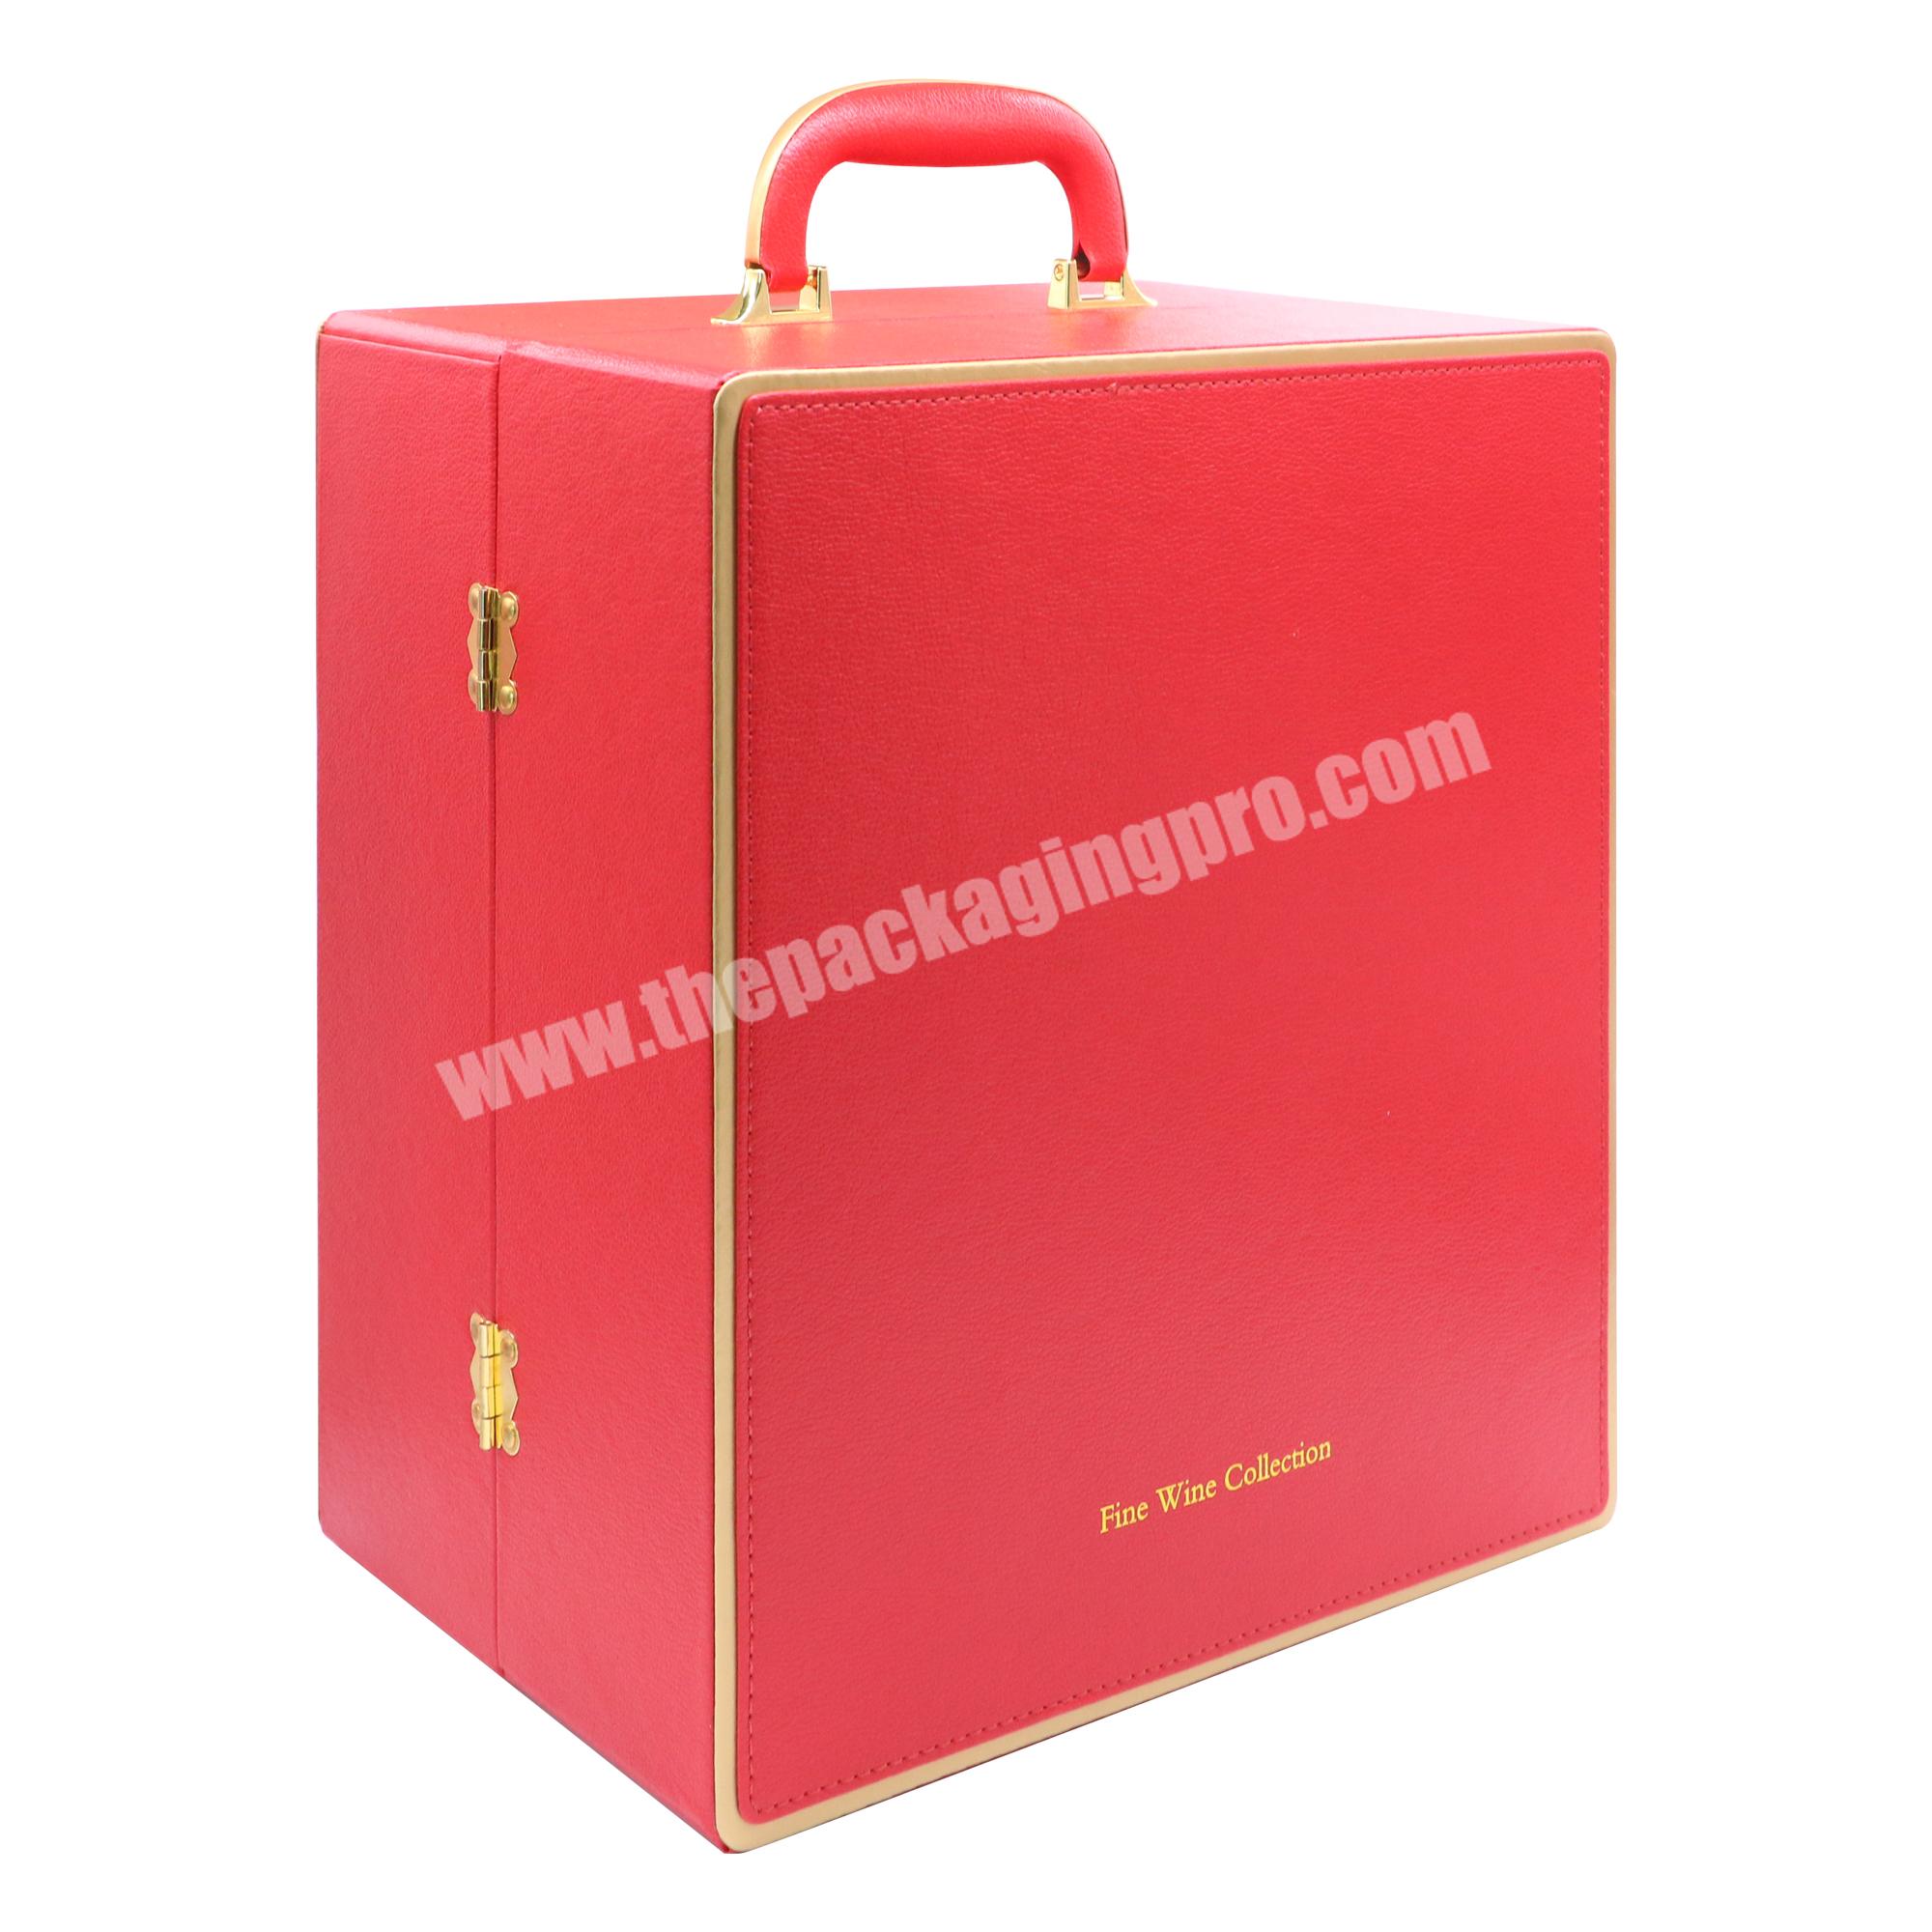 Leather red wine packaging boxes wholesale wine box for 6 bottle wine box gift set